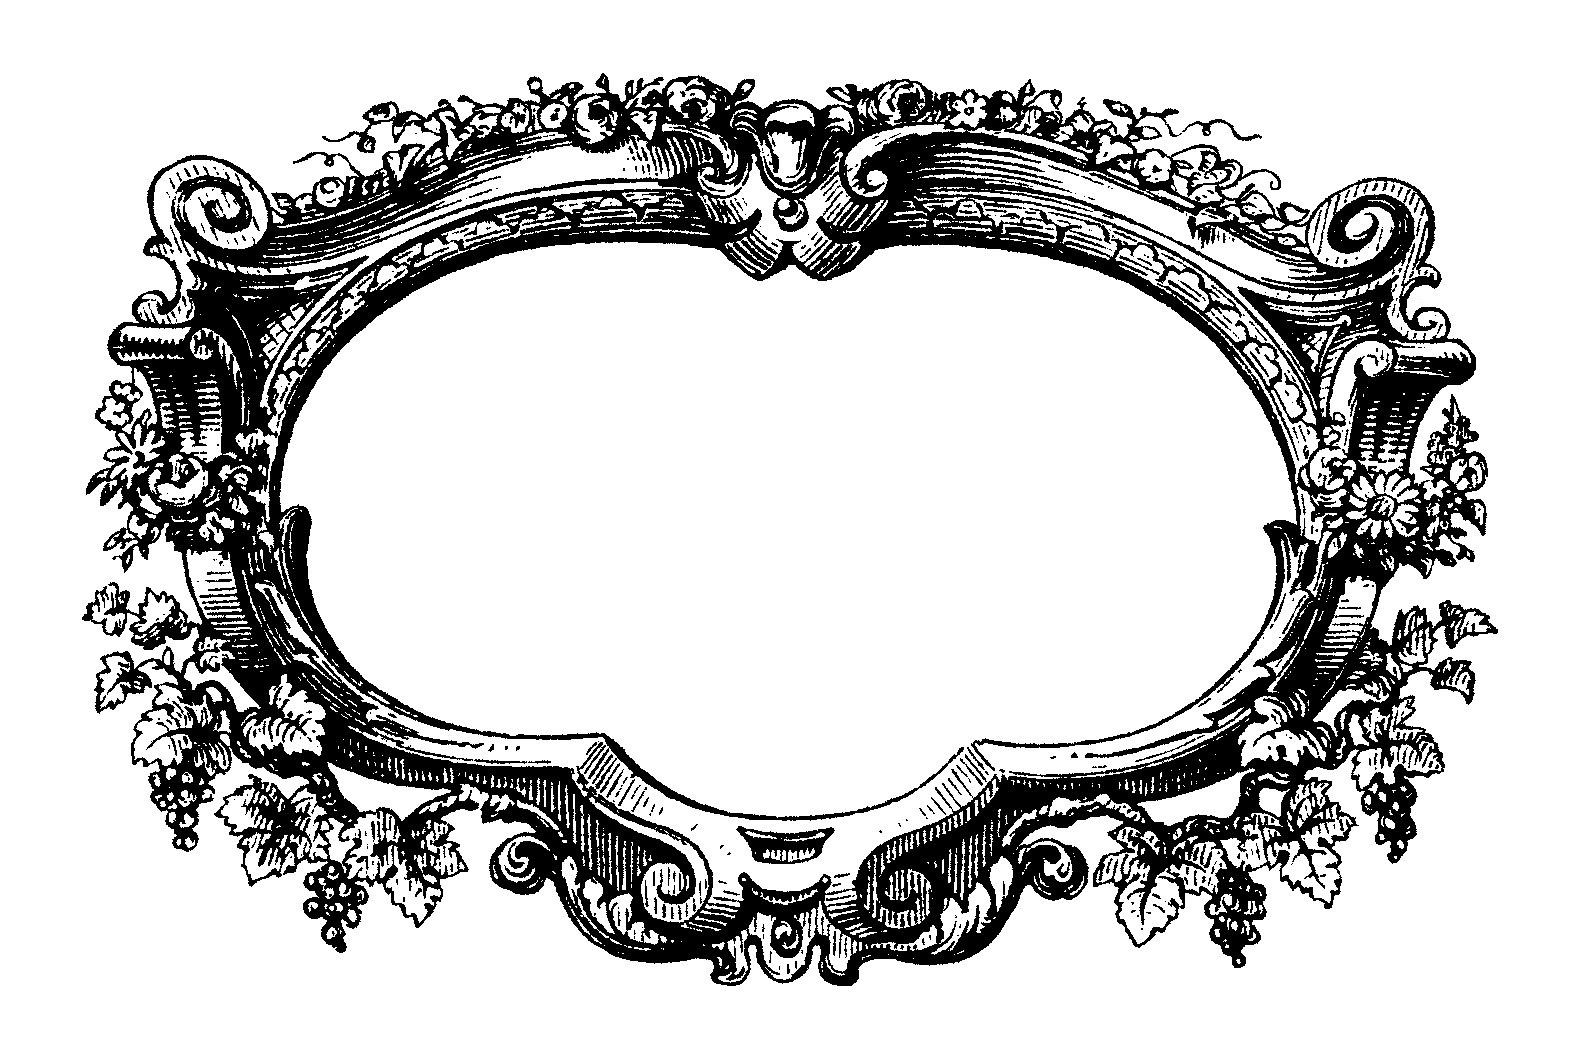 The Sum Of All Crafts: Filigree Frames - ClipArt Best - ClipArt Best